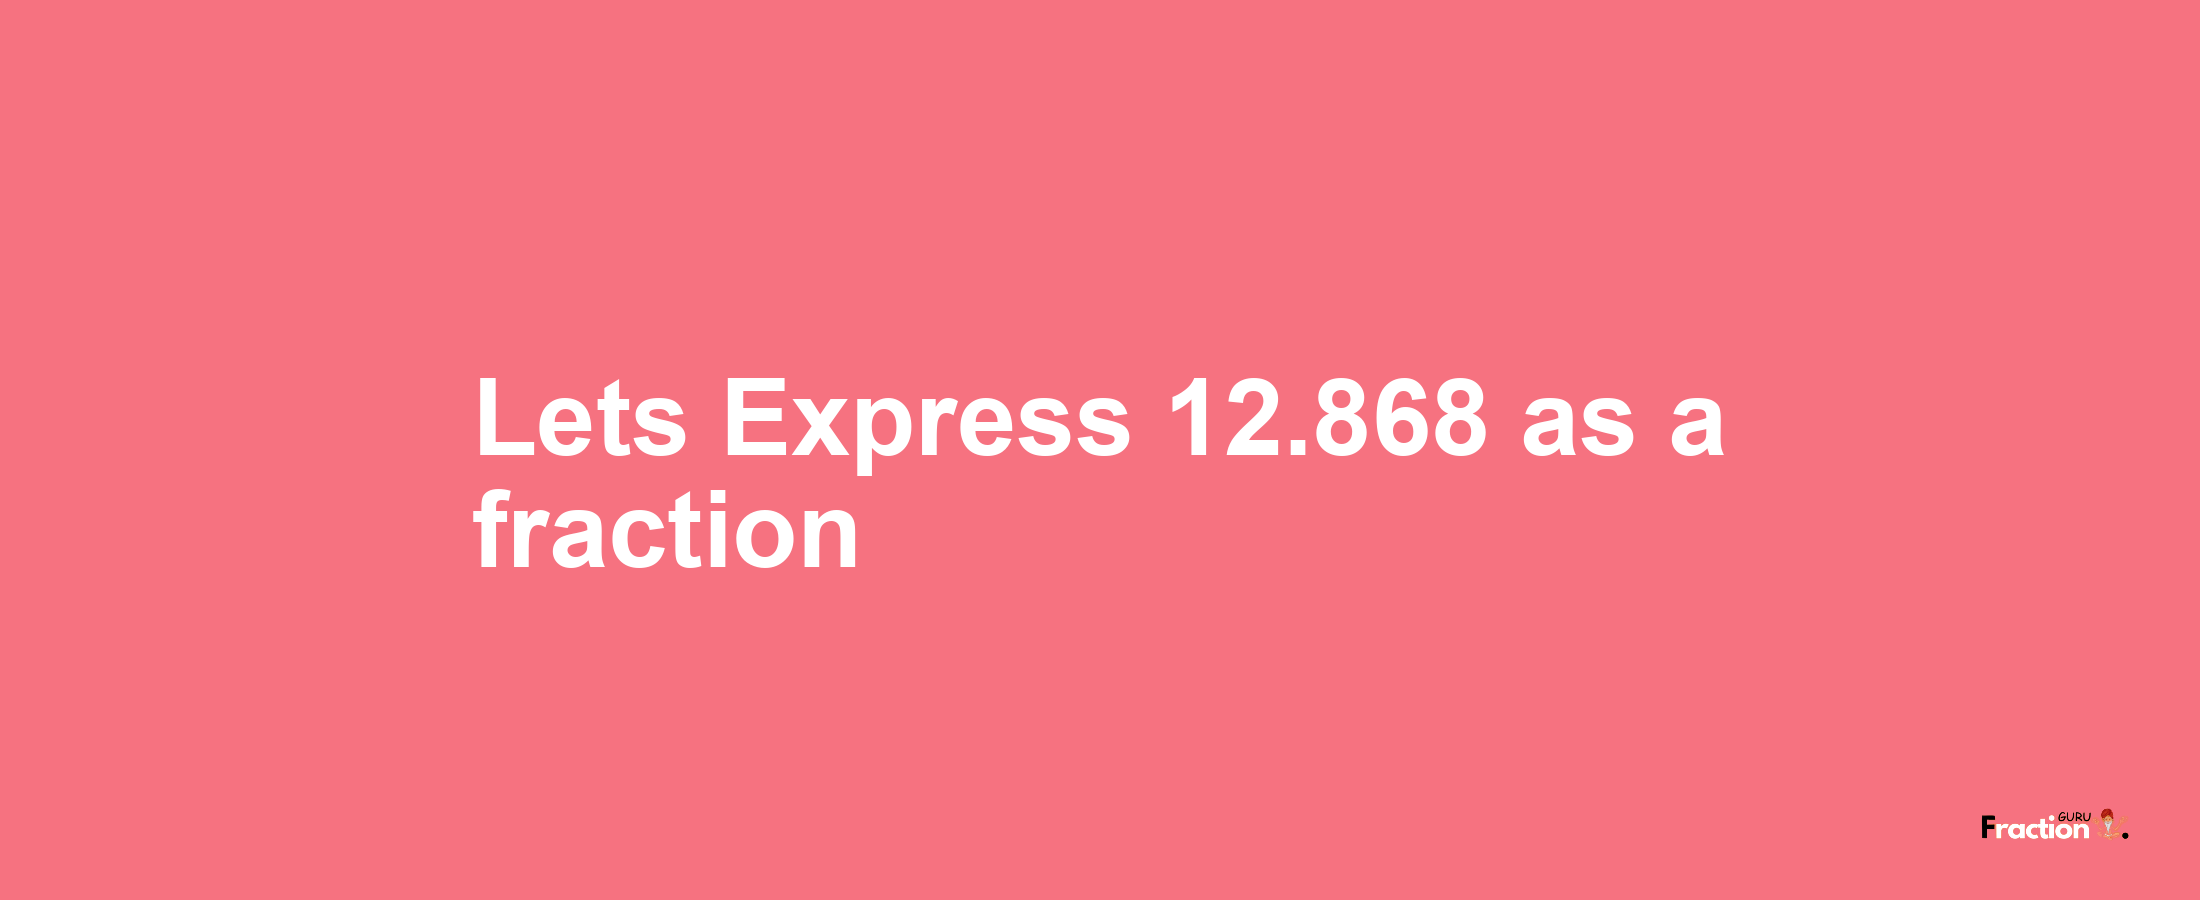 Lets Express 12.868 as afraction